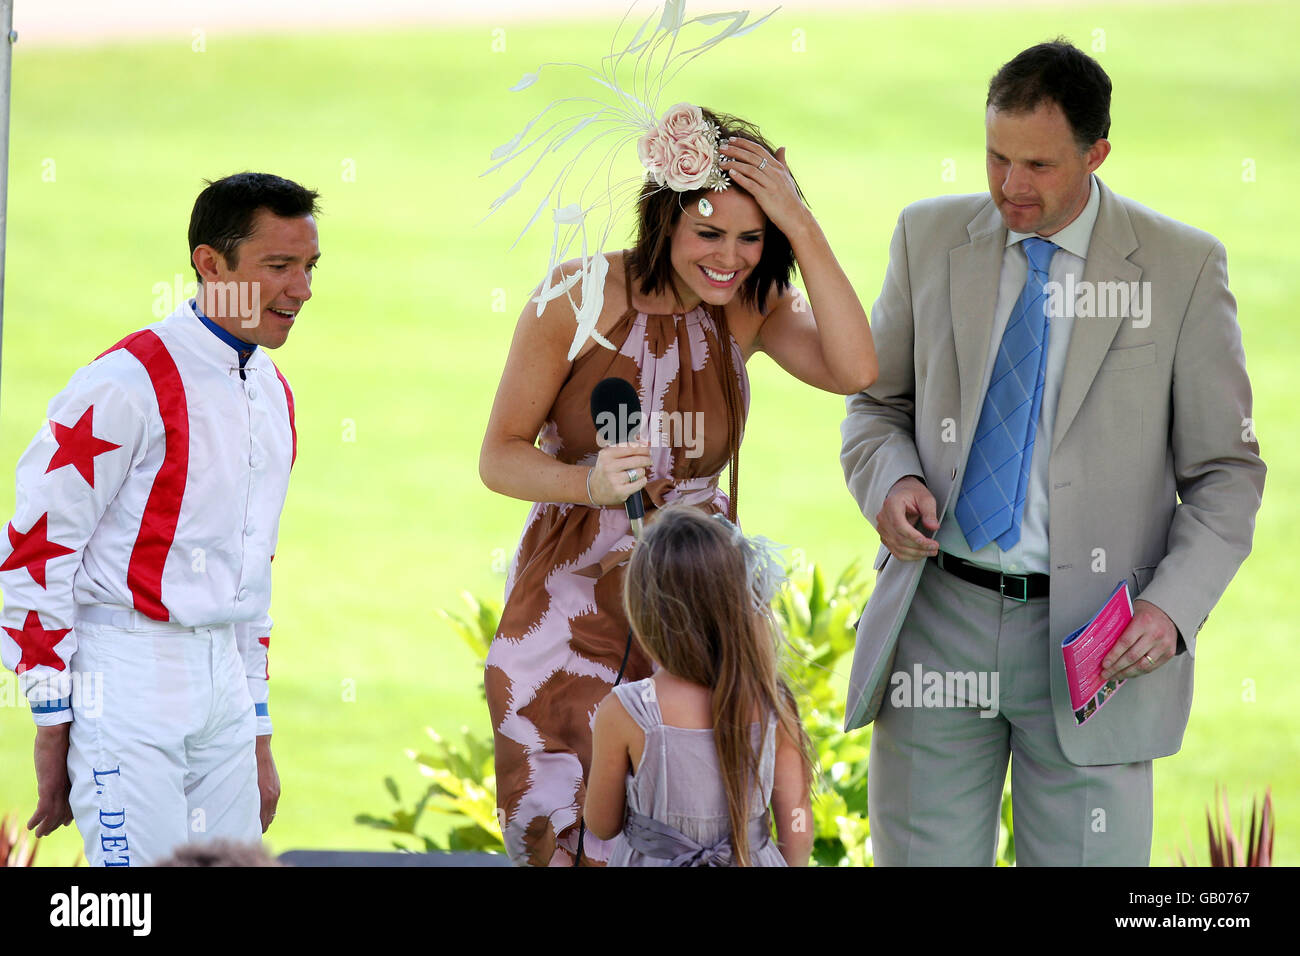 Actress and model Susie Amy (l) and TV presenter Sarah Jagger (r) introduce jockey Frankie Dettori as they prepare to present the awards for best dressed at Sandown Park Stock Photo